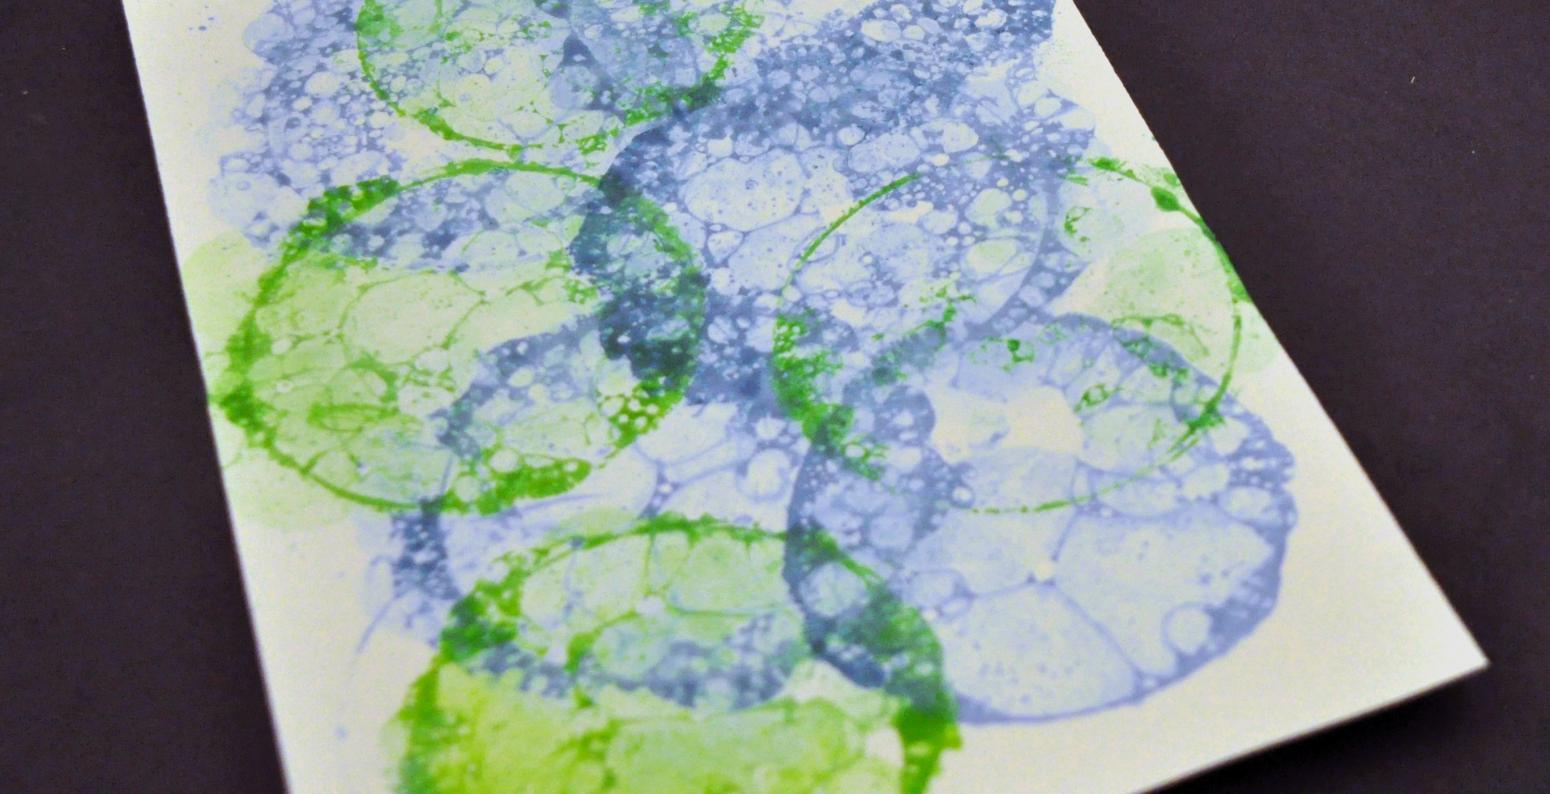 A white paper with blue and green bubble prints.